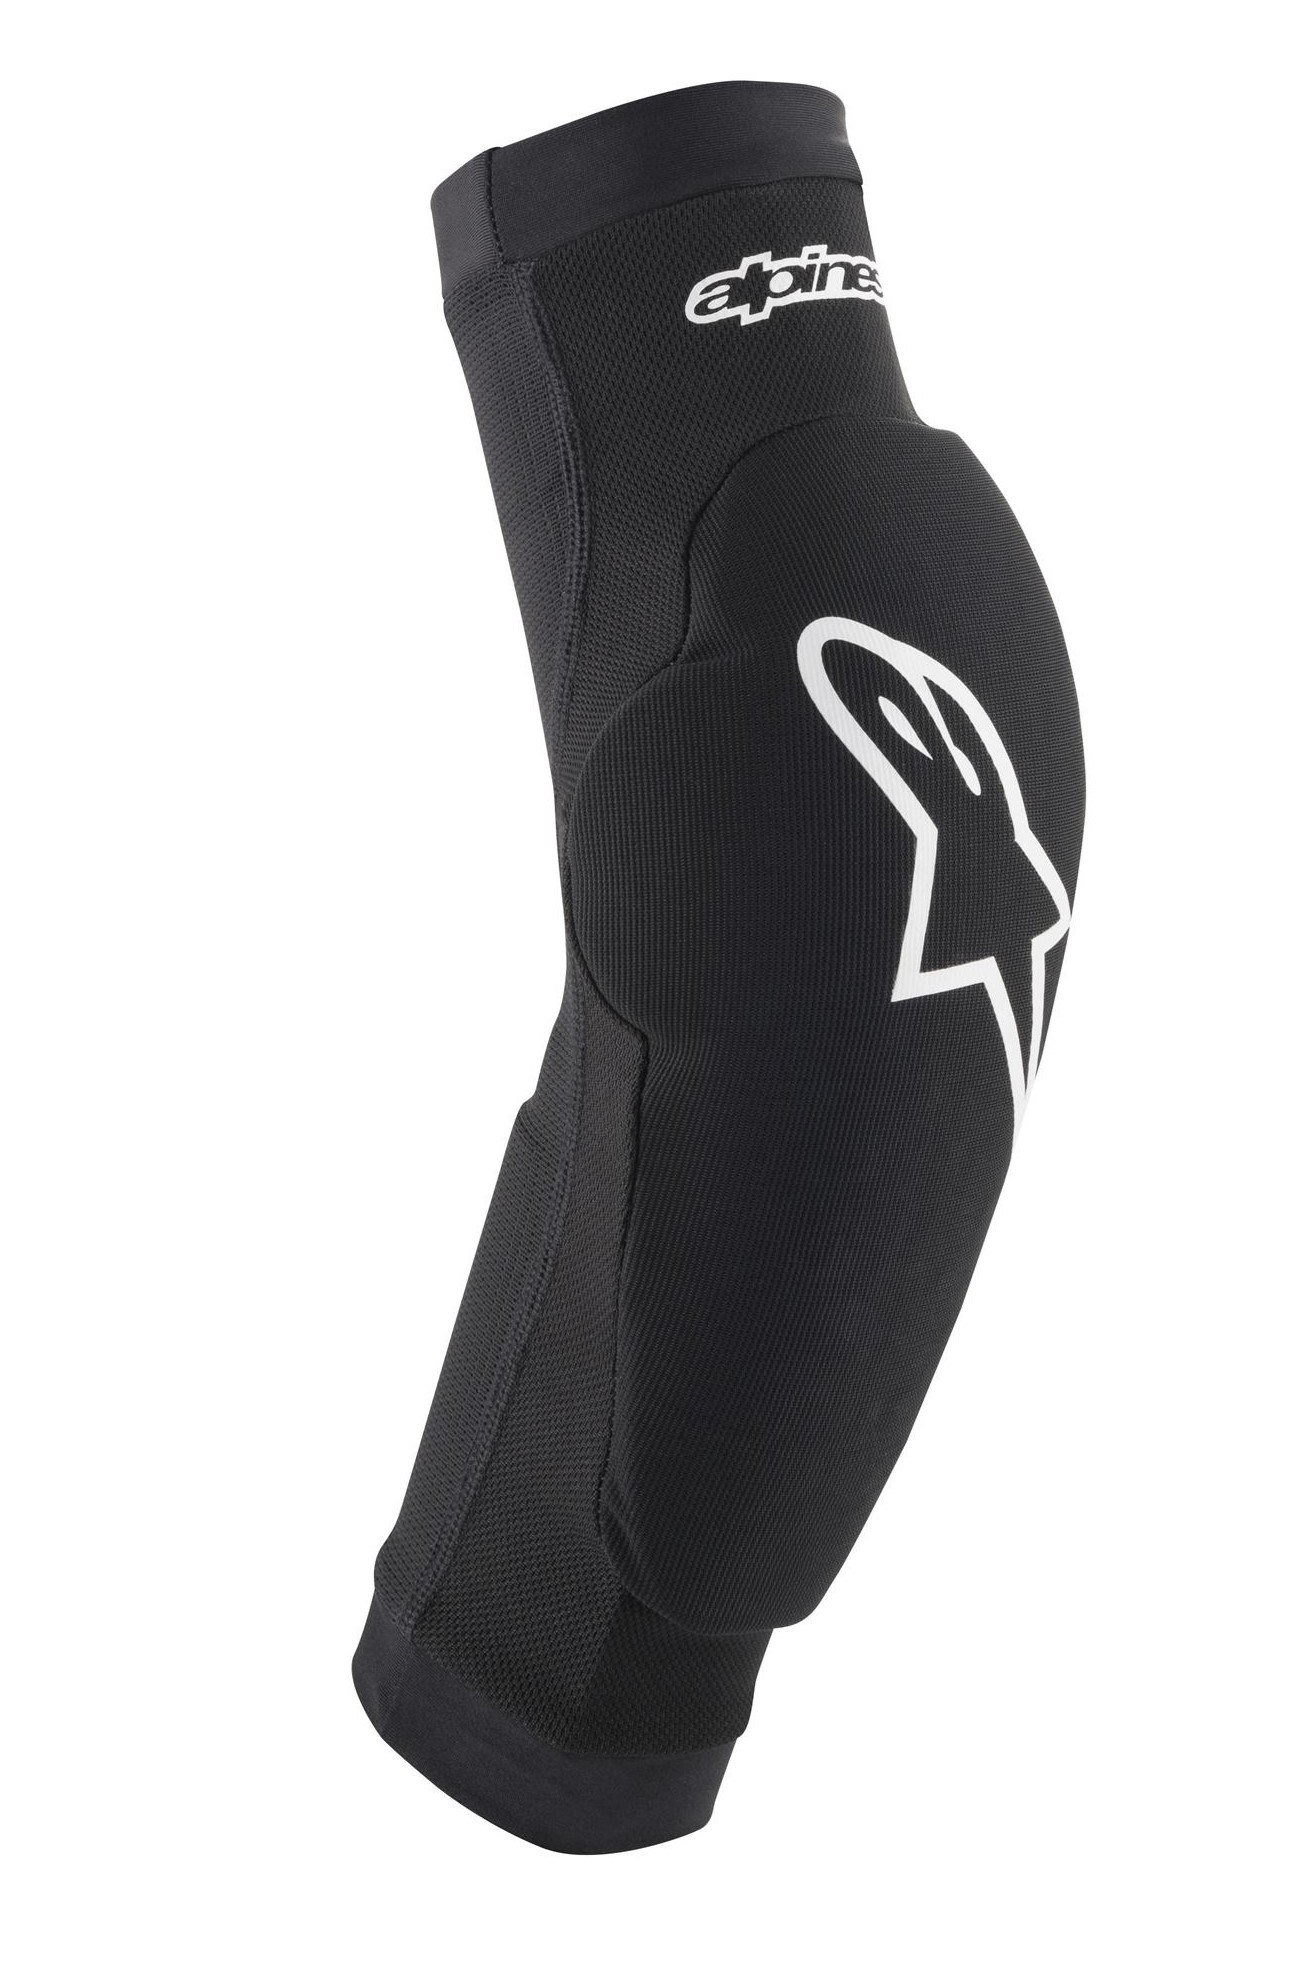 Paragon Plus Youth Elbow Protector -